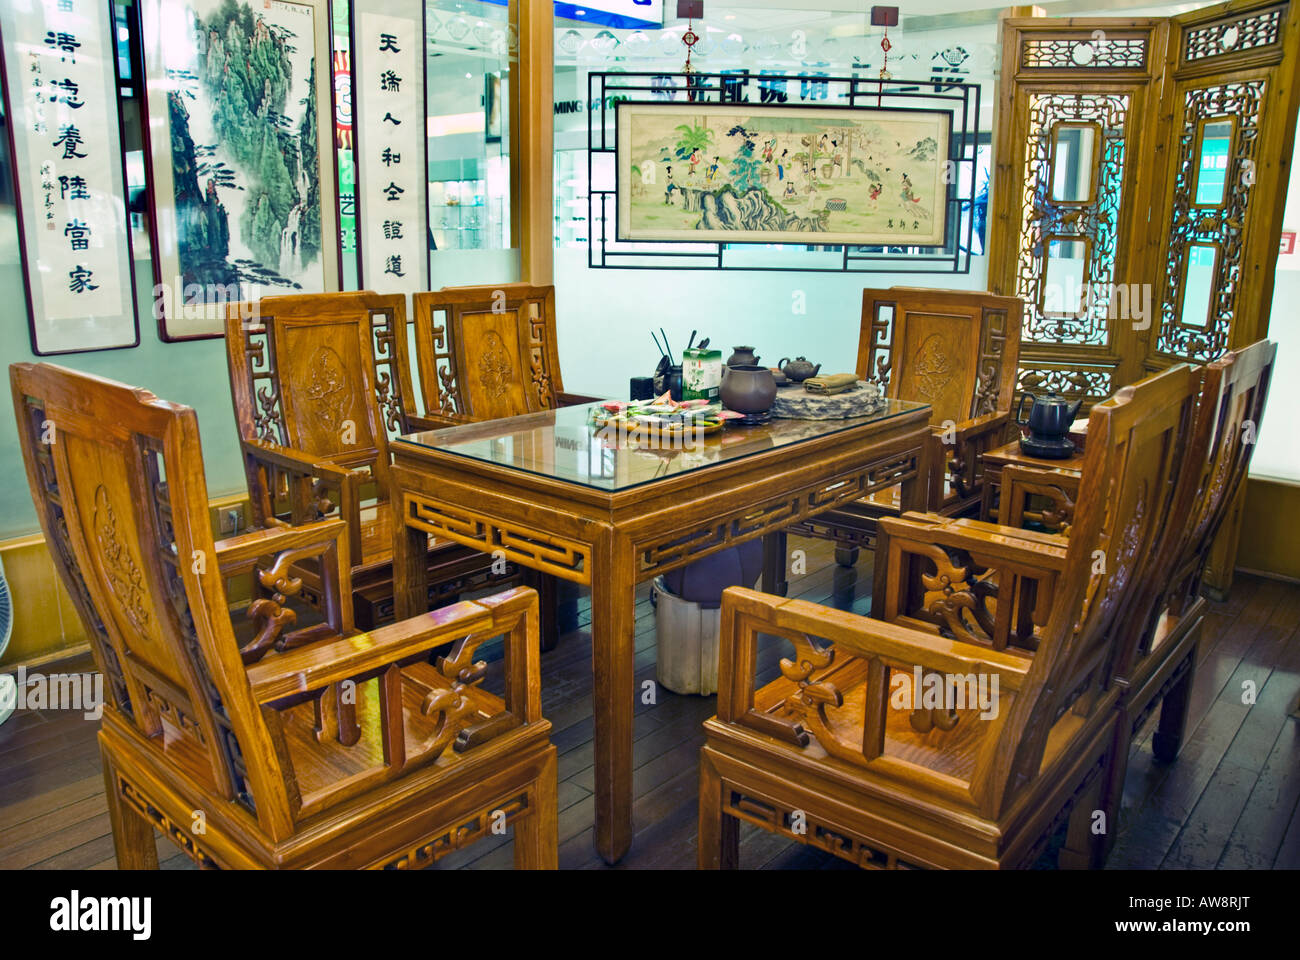 Beijing China Traditional Wooden Furniture In Tasting Area